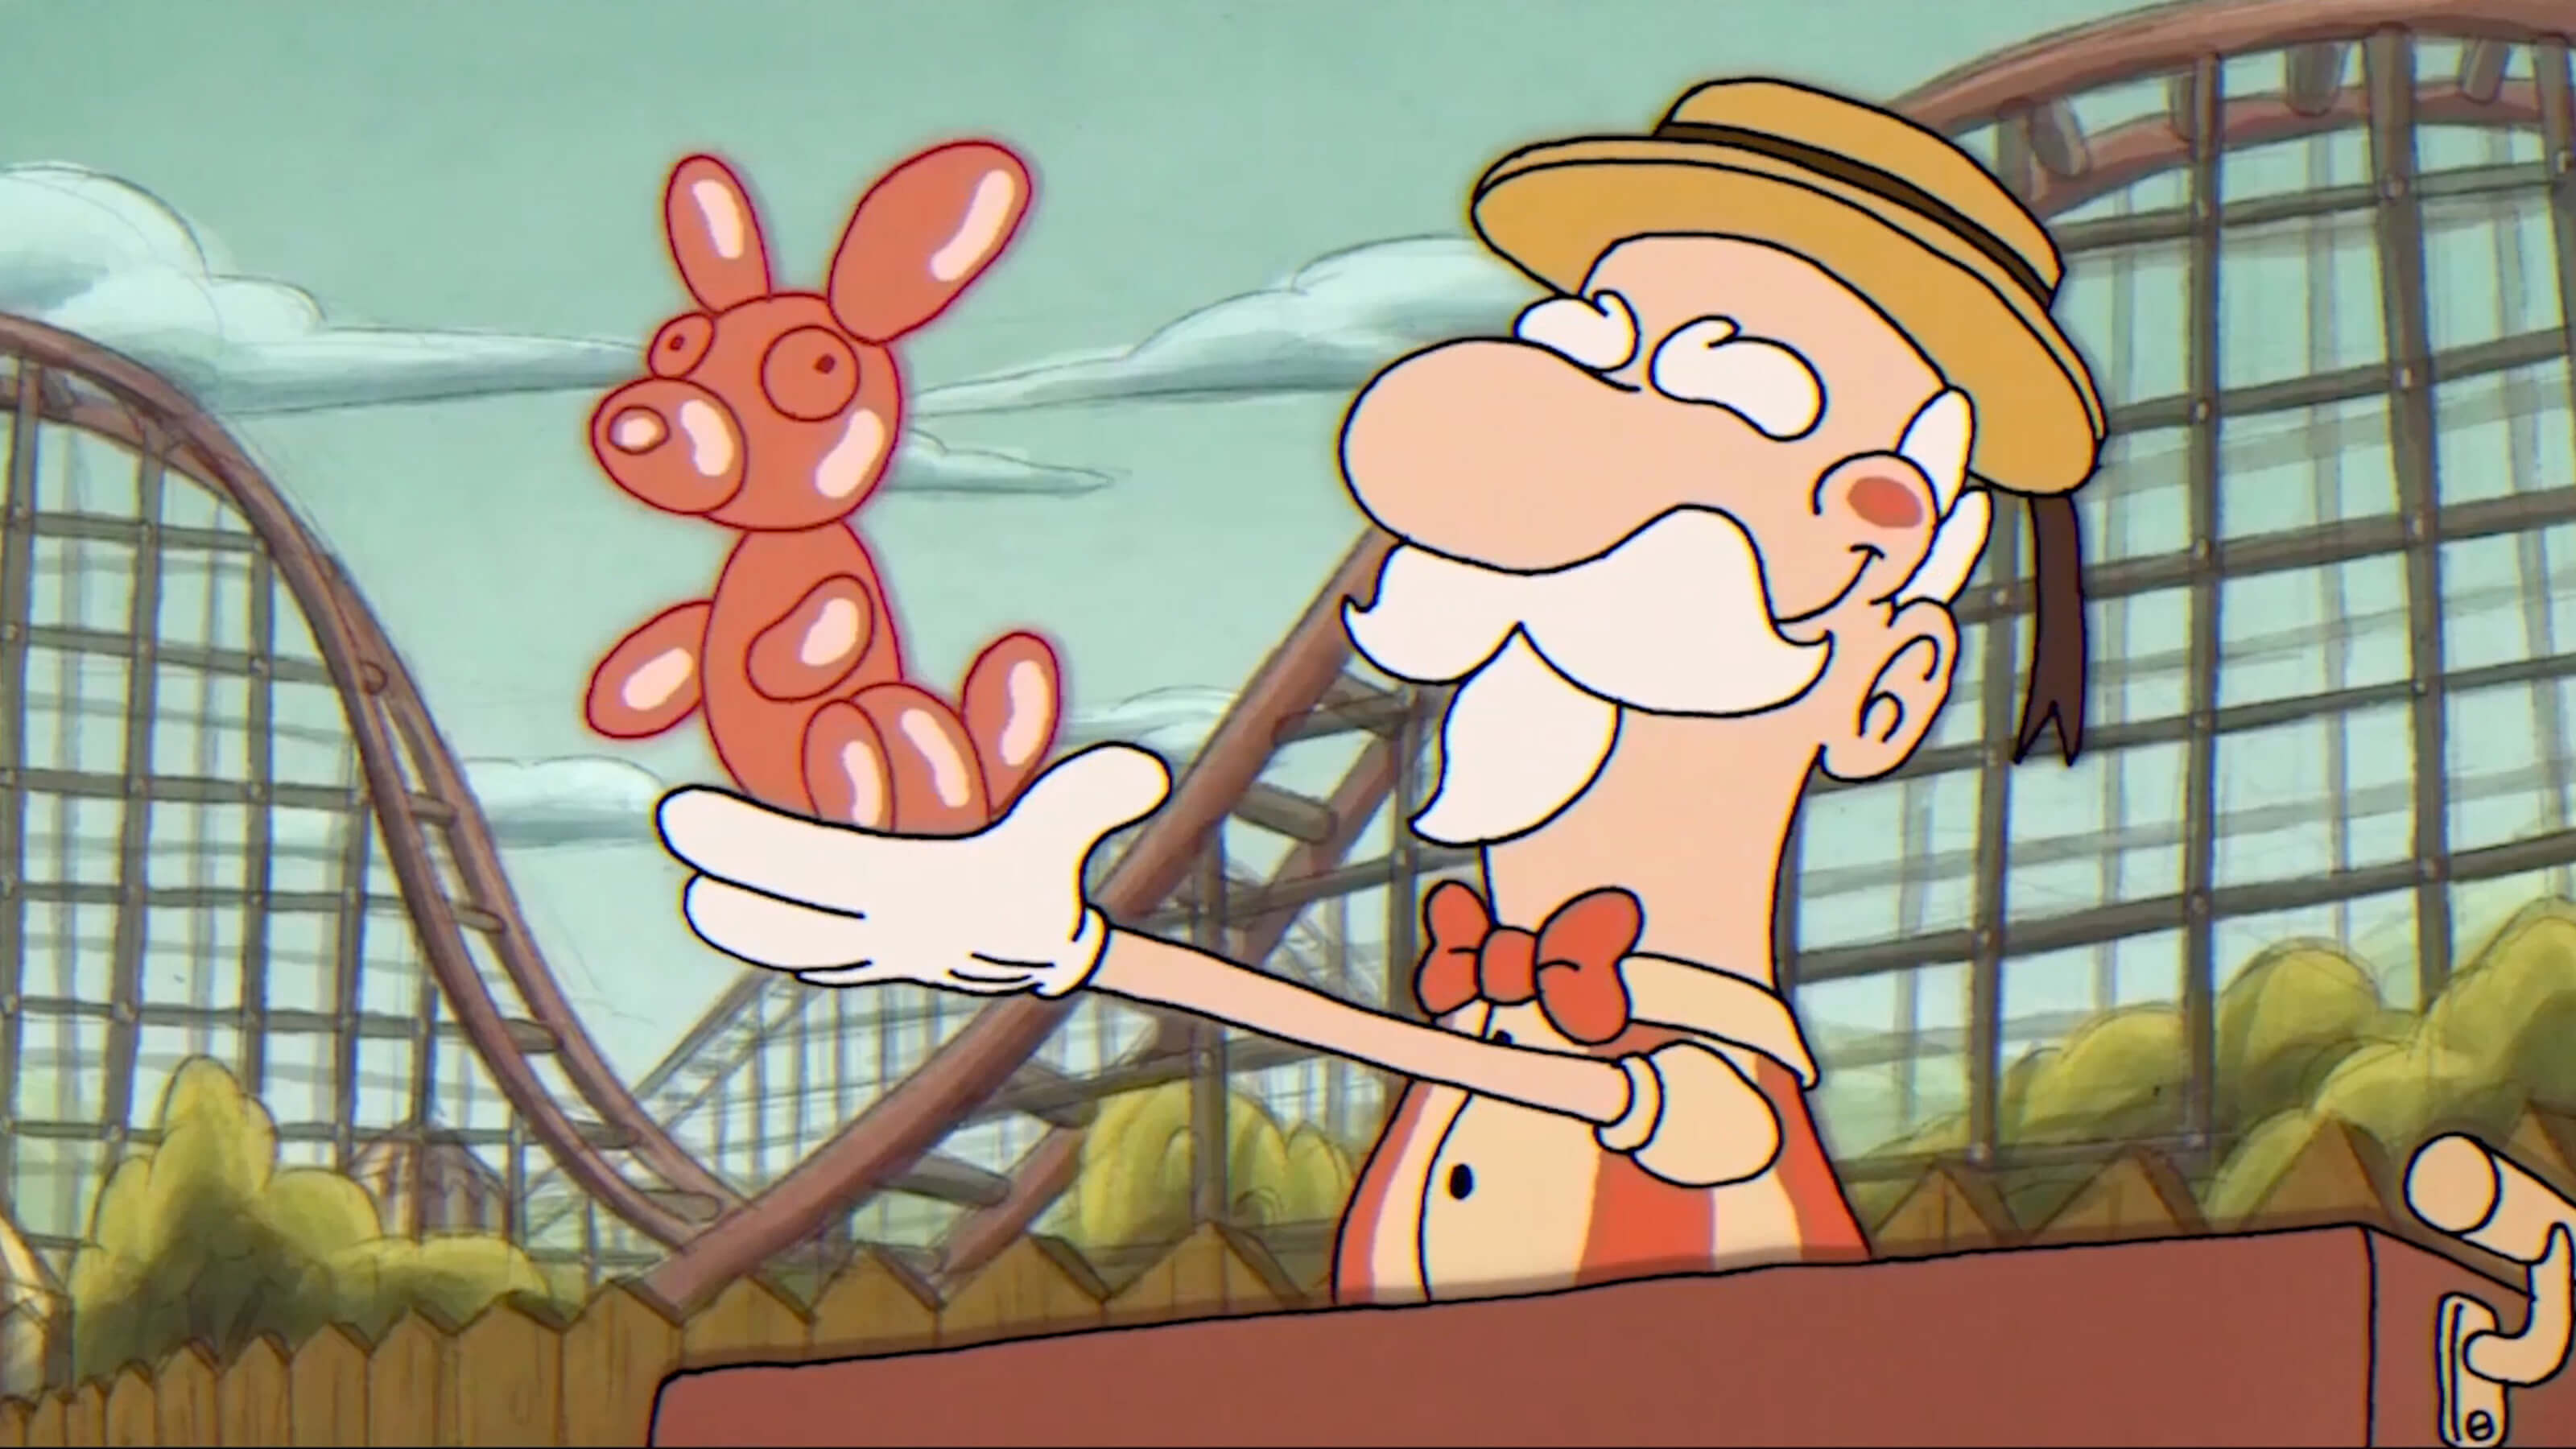 ﻿An old carnival balloonman holds up a red balloon dog ﻿at an amusement park with a roller coaster